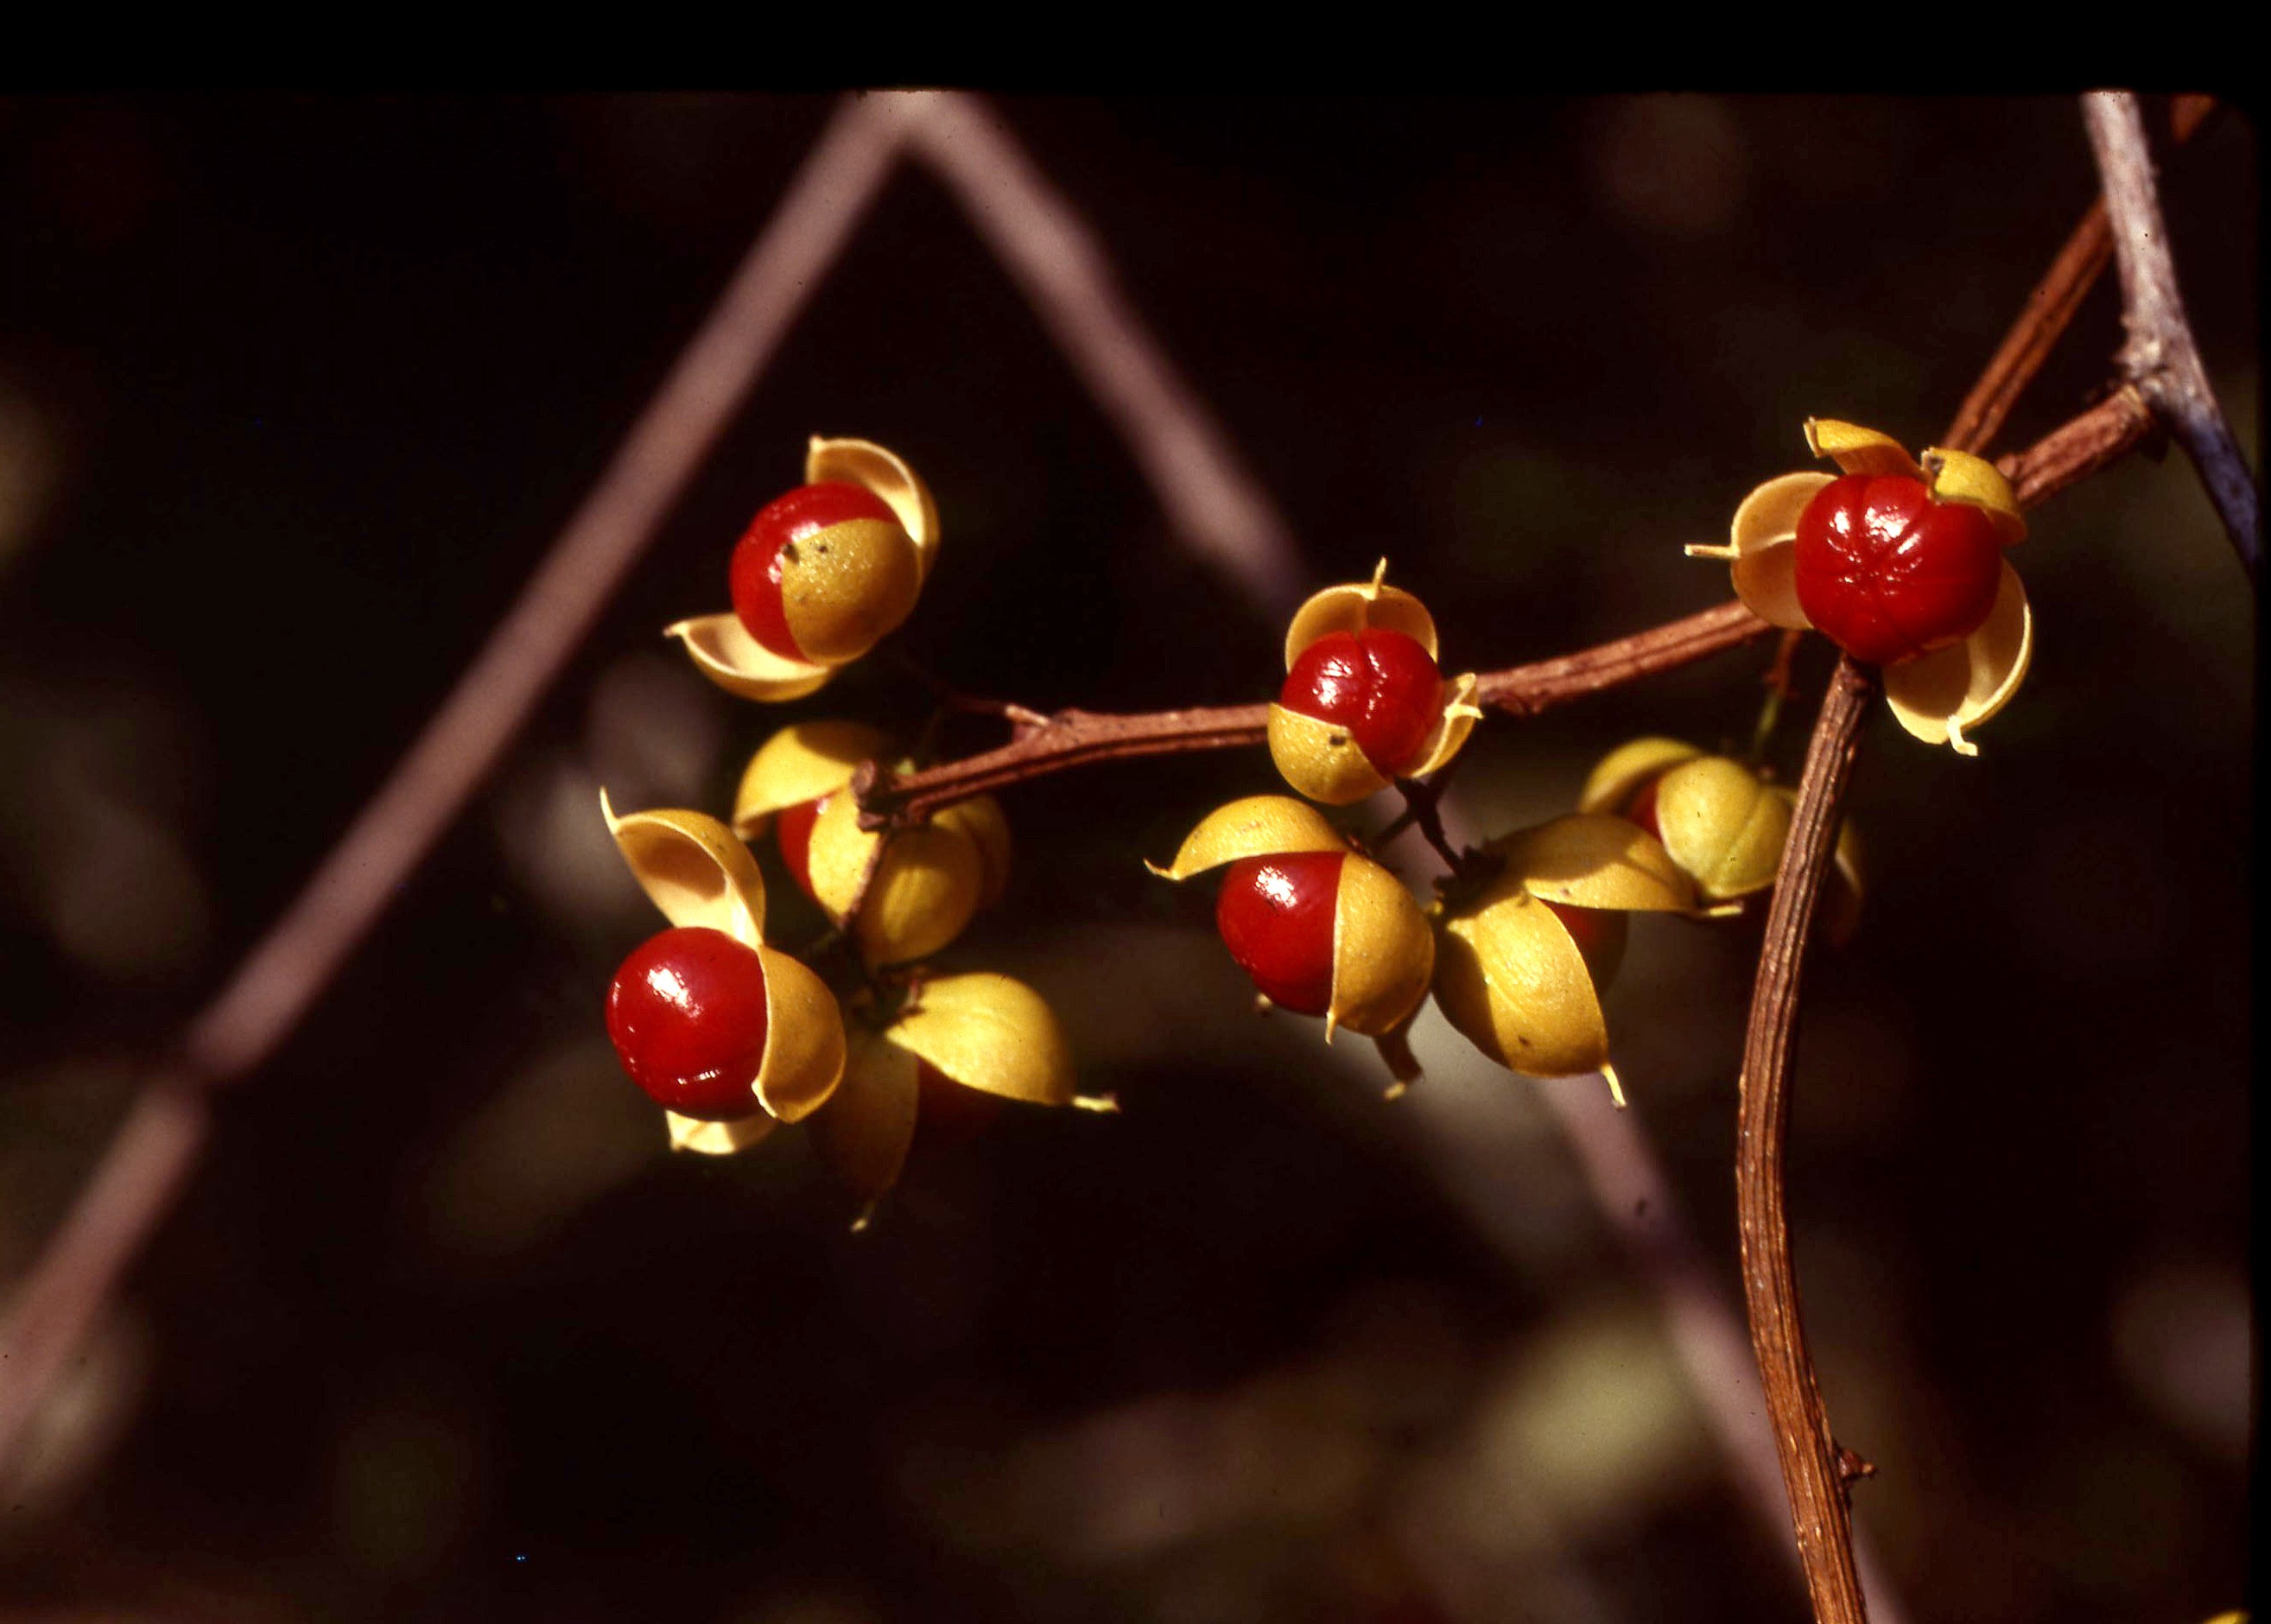 The Scientific Name is Celastrus orbiculatus. You will likely hear them called Oriental Bittersweet. This picture shows the The fruits are yellow-orange capsules which split open to reveal the bright scarlet-red arils. of Celastrus orbiculatus